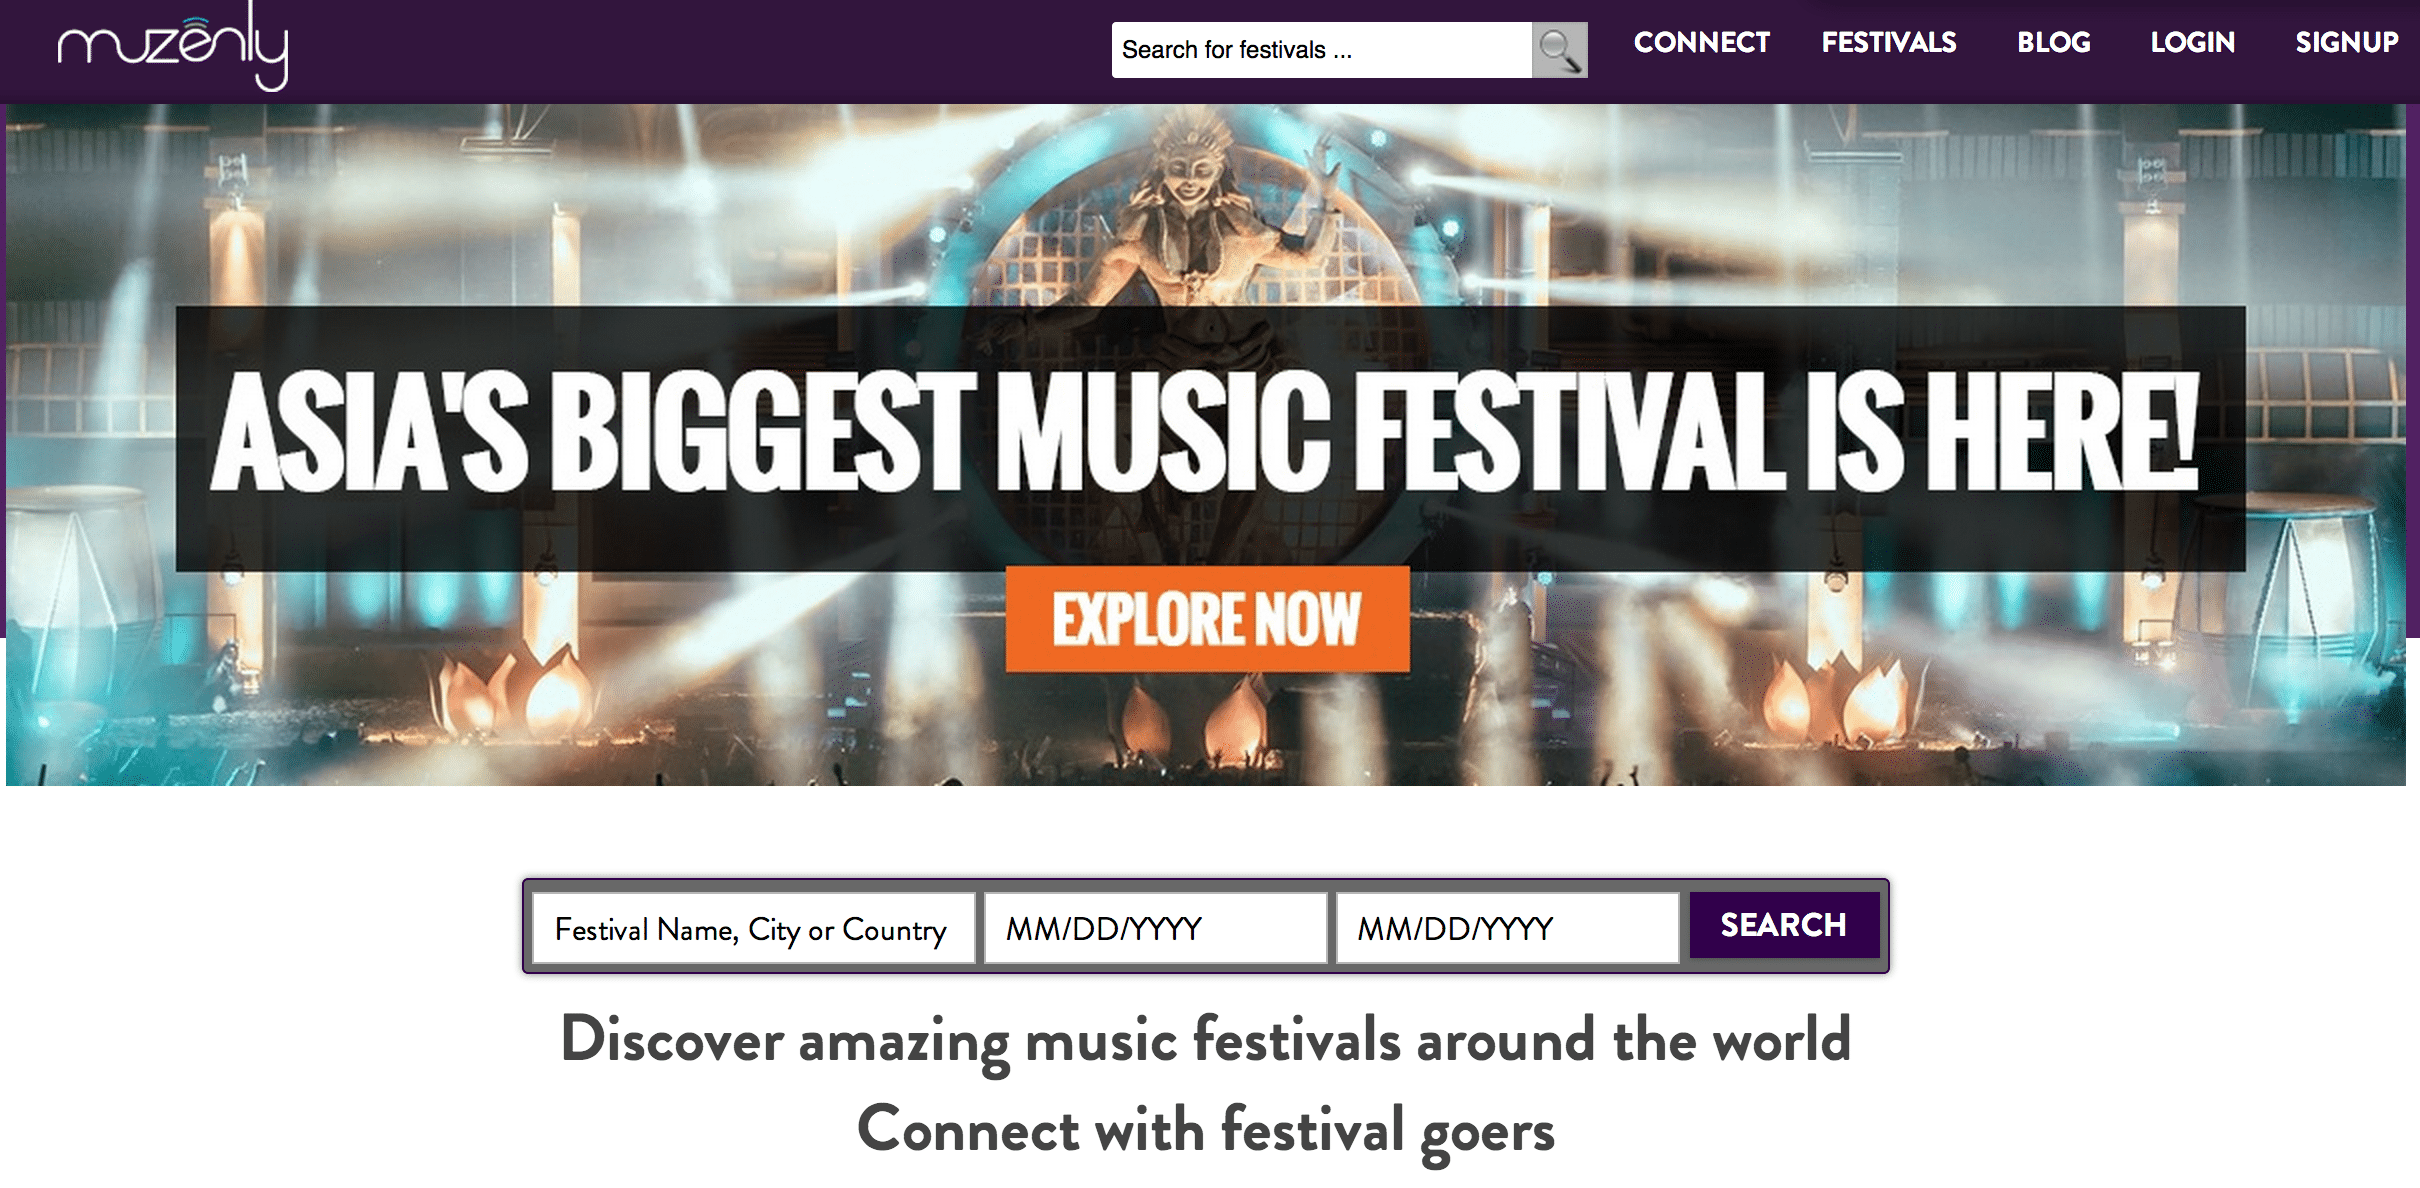 Muzenly lets you discover and book travel to music festivals around the world.